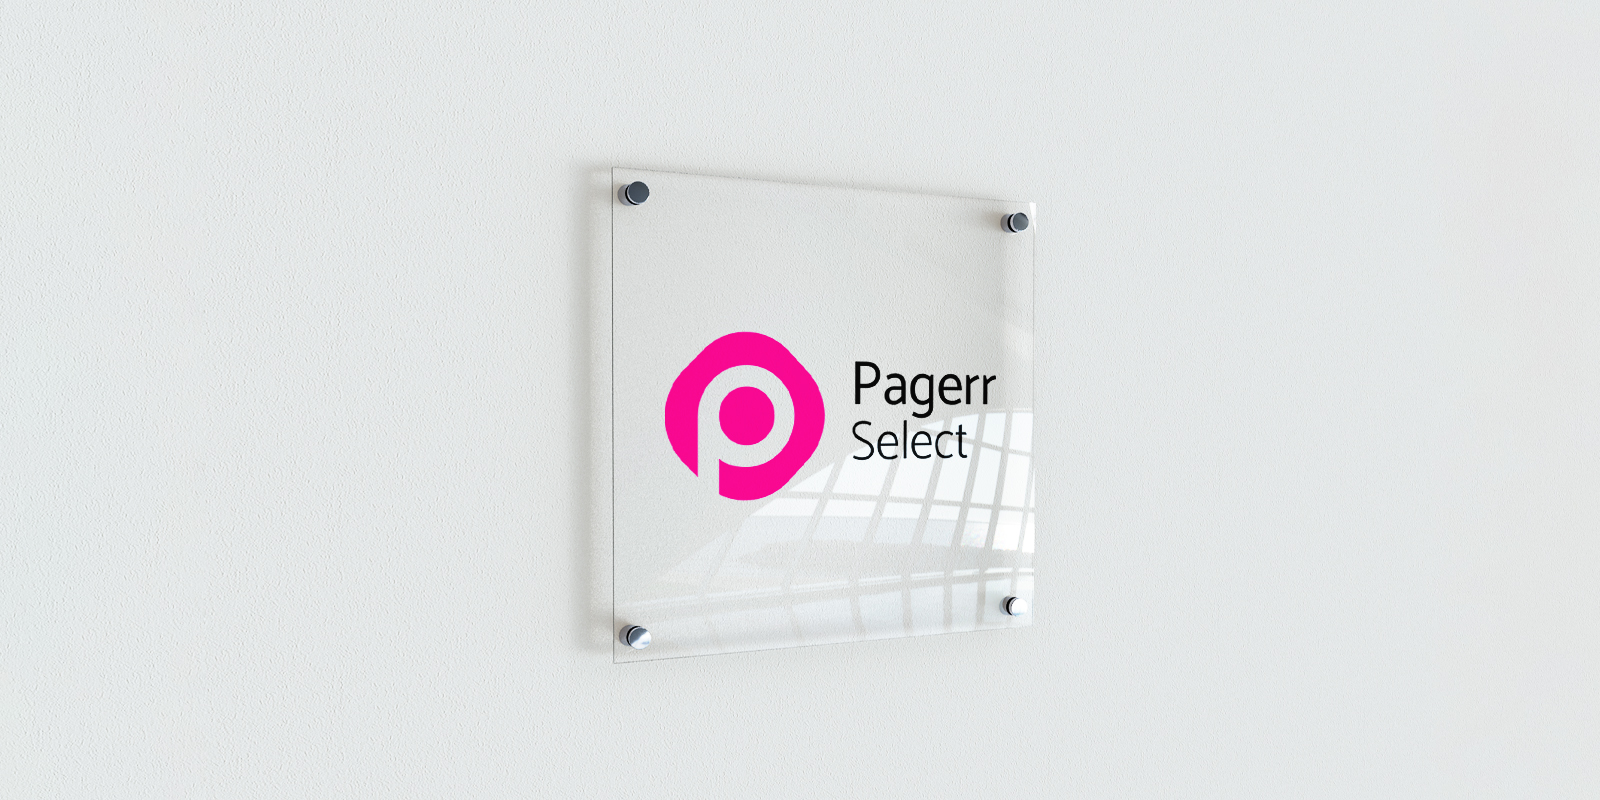 Acrylic signs in Launceston - Print with Pagerr